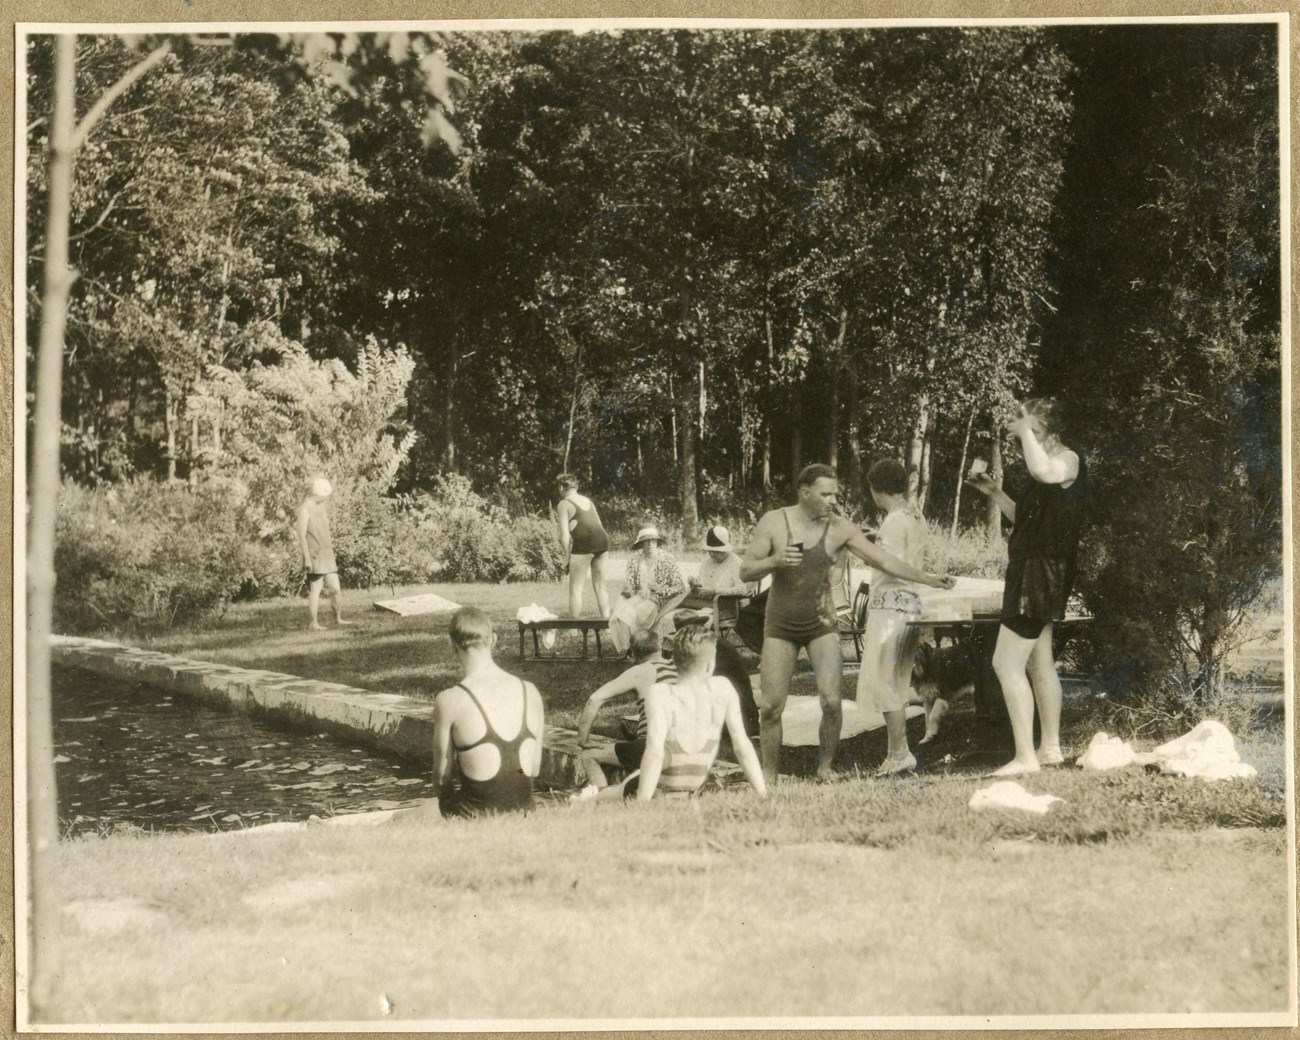 A group of people wearing 1930s style swimwear gather in the grass at the edge of a pool